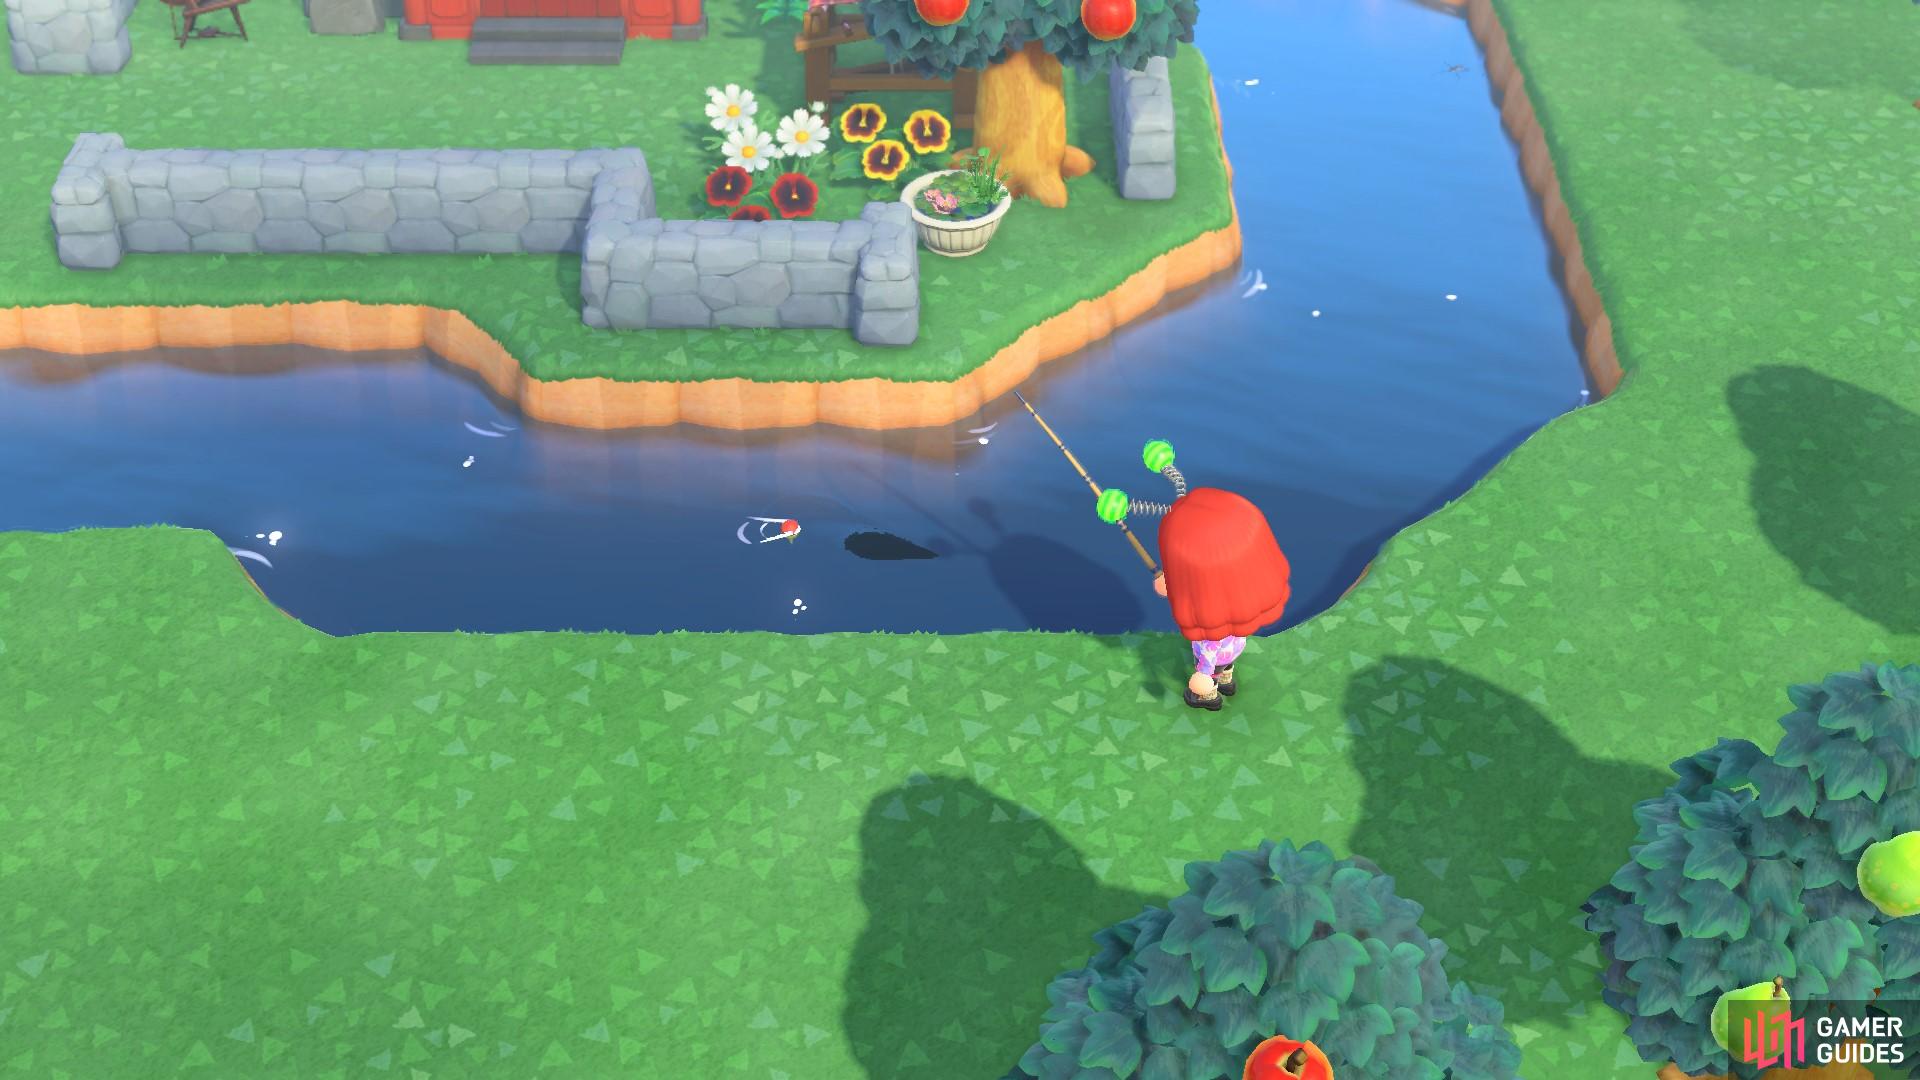 The Nook Miles+ challenges might require that you go fishing for a certain type or amount of fish.